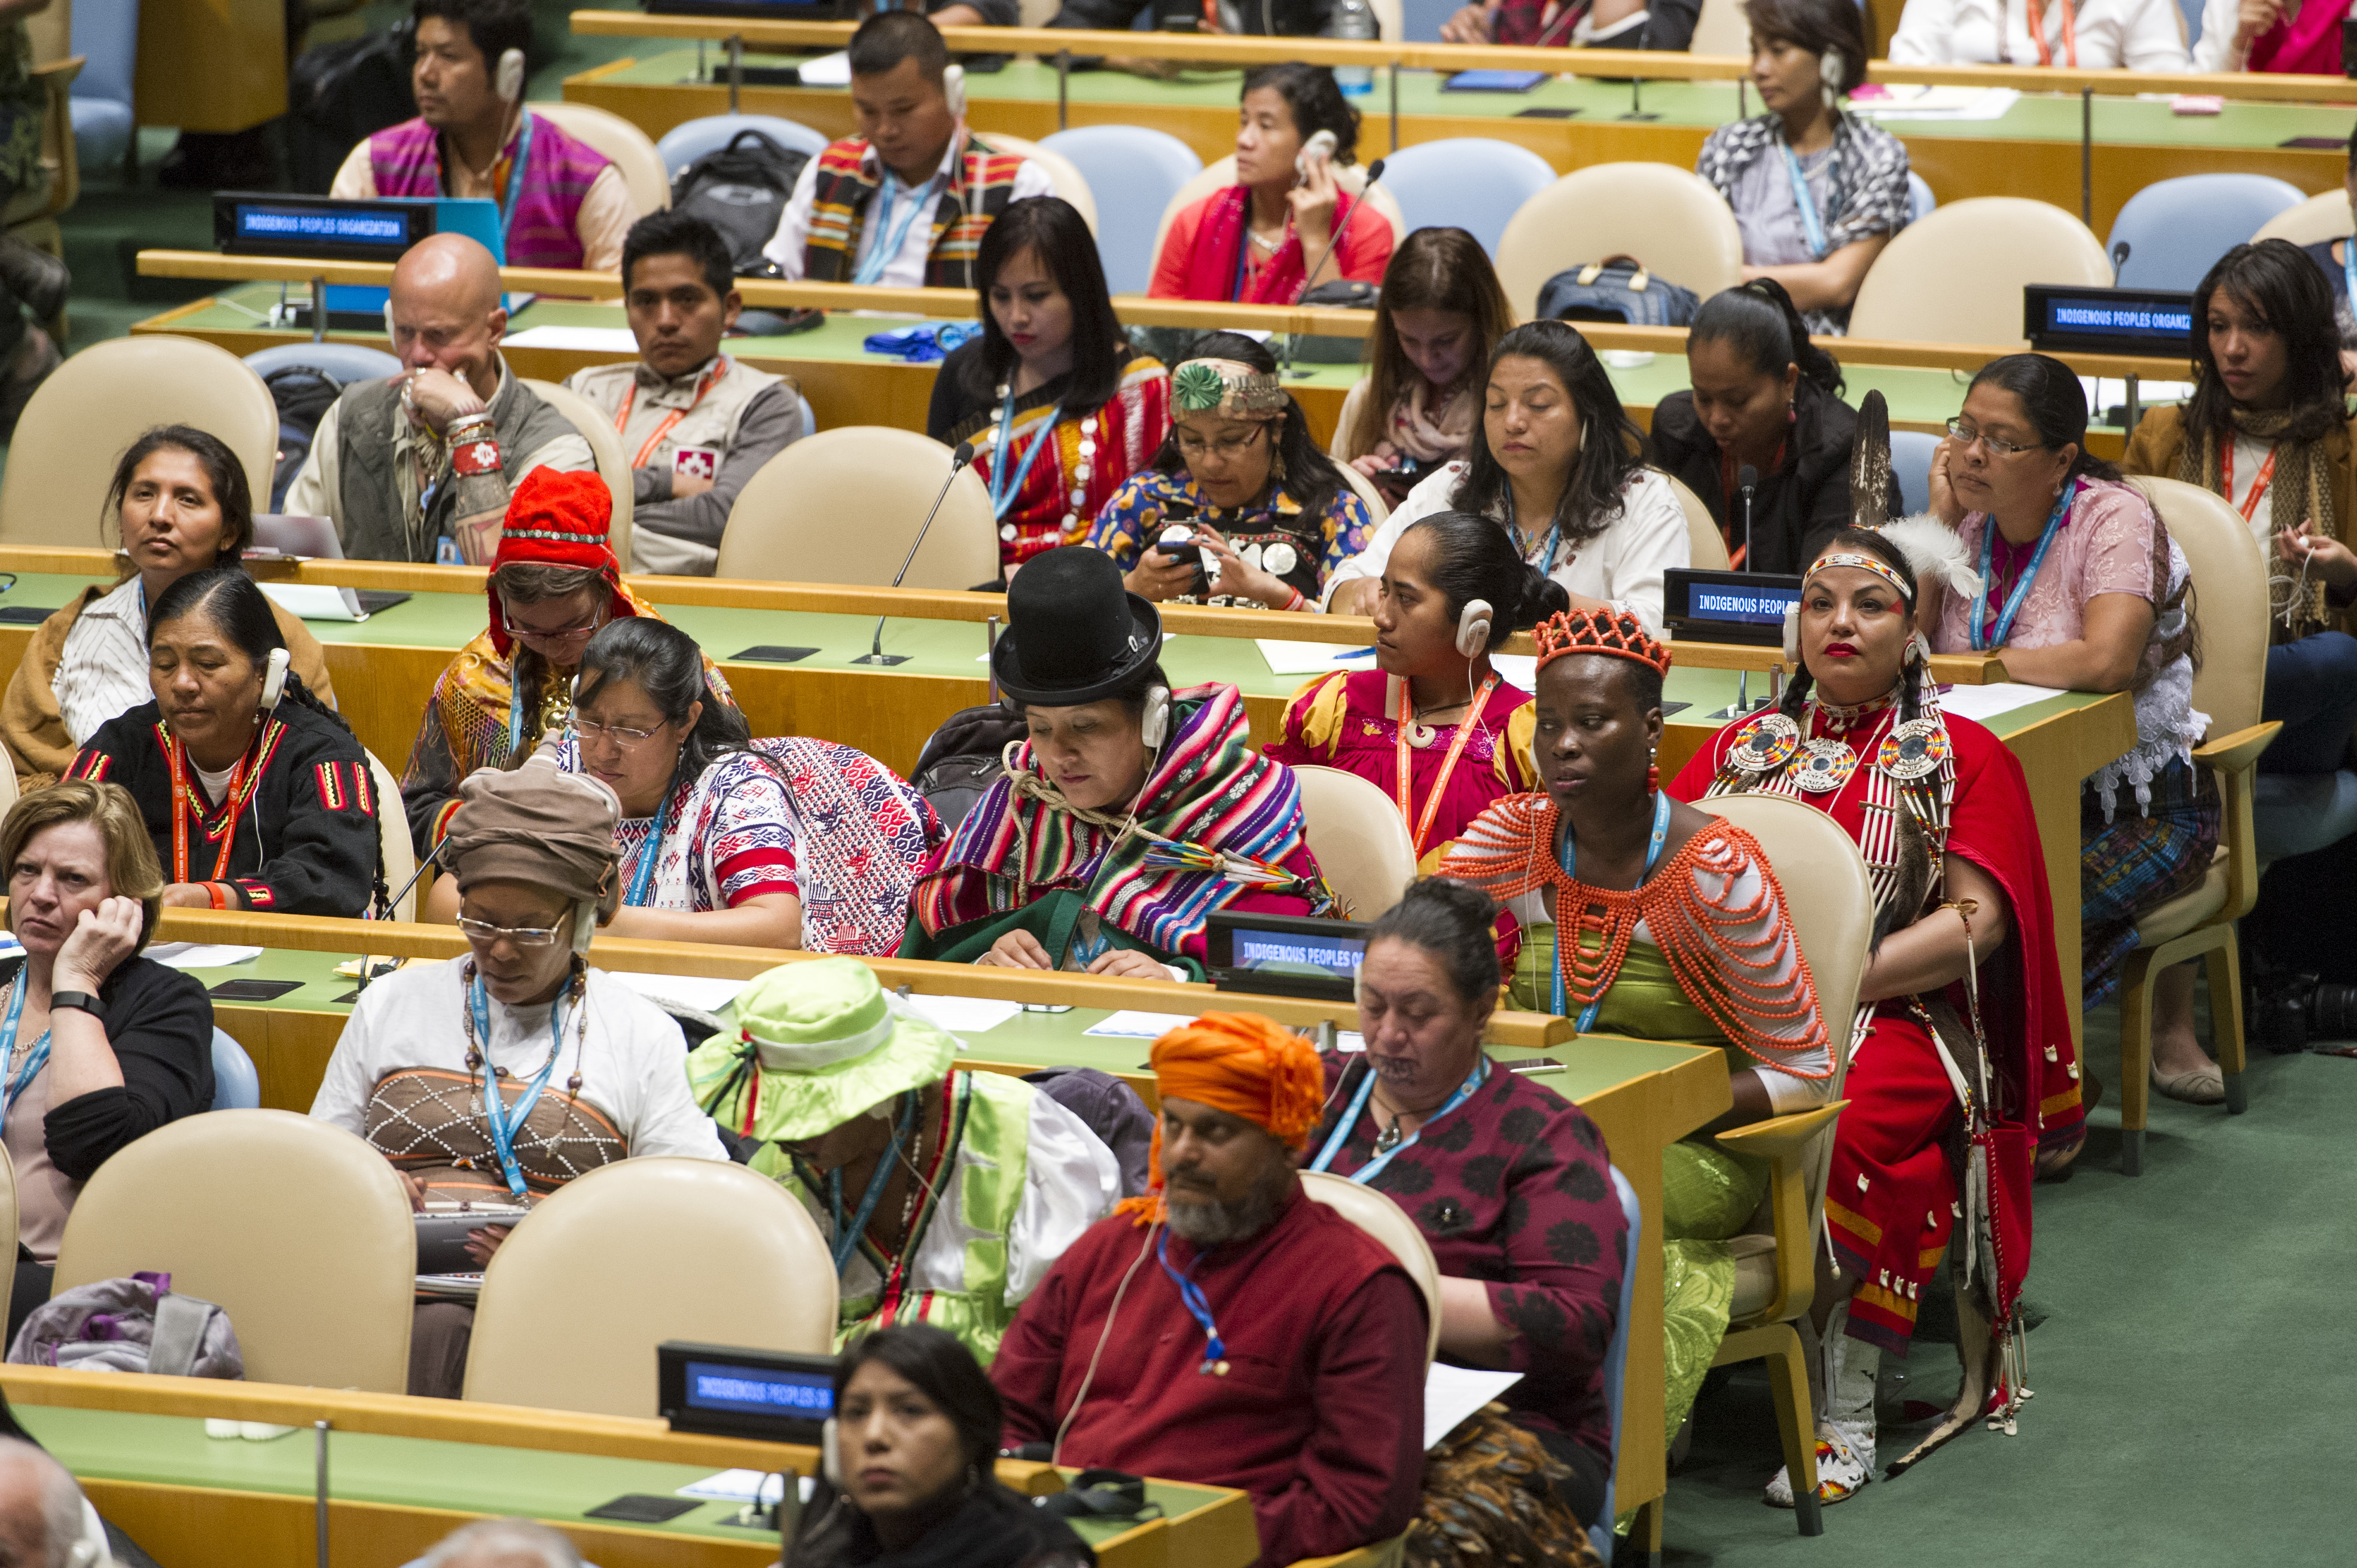 Opening of the Fifteenth session of the Permanent Forum on Indigenous Issues (UNPFII15)
Theme ÒIndigenous peoples: Conflict, Peace and ResolutionÓ